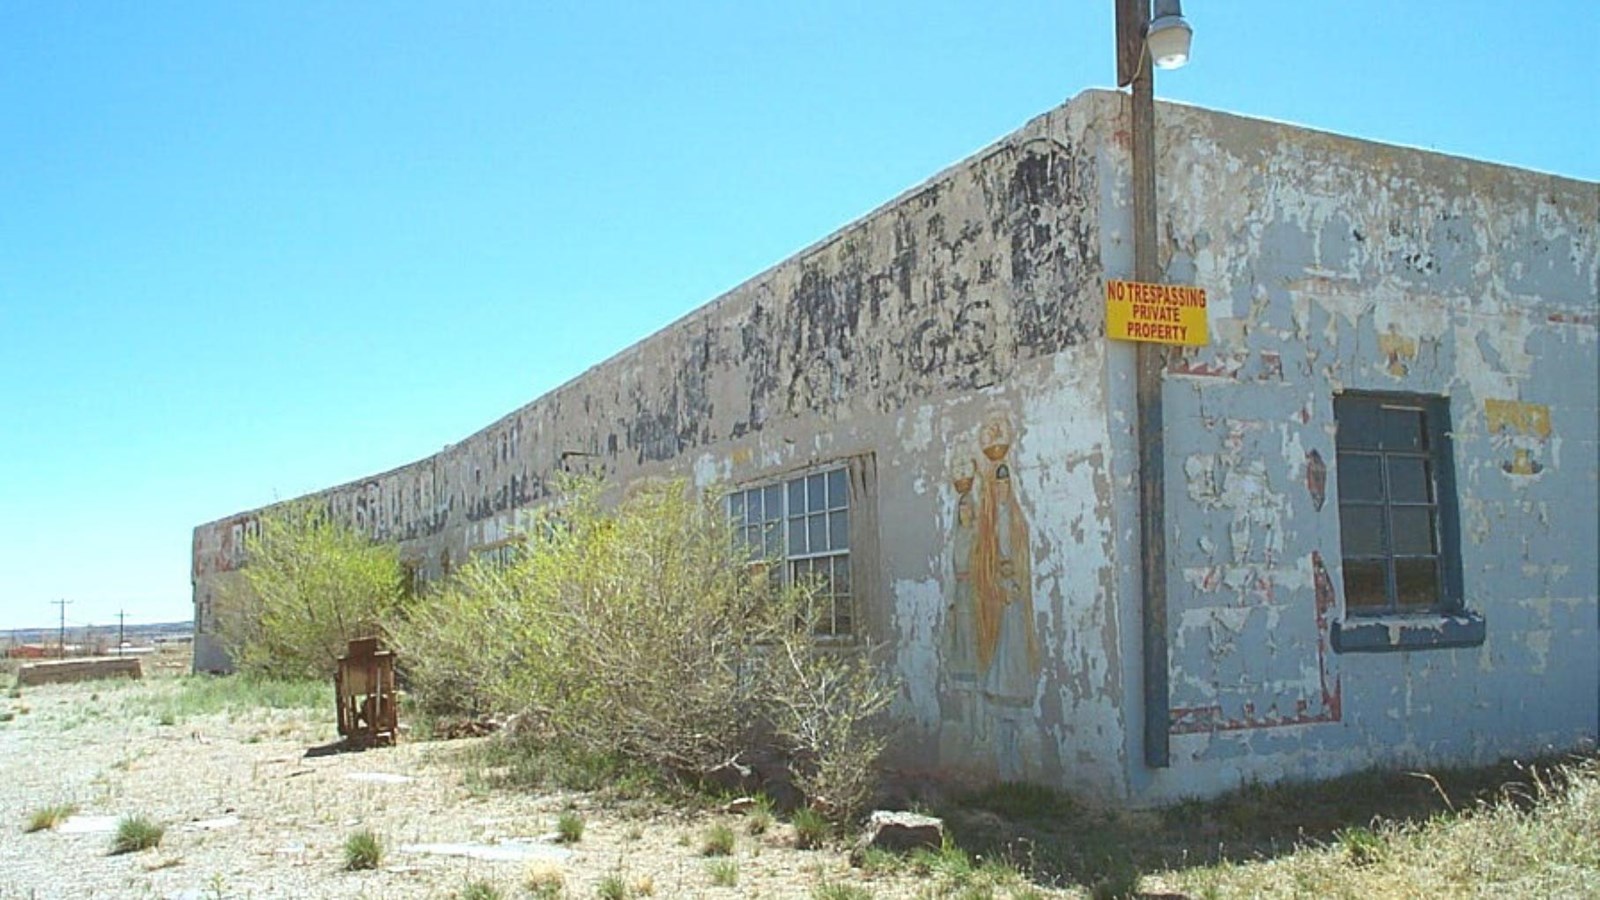 A large stucco building with very faded colorful paint on the exterior